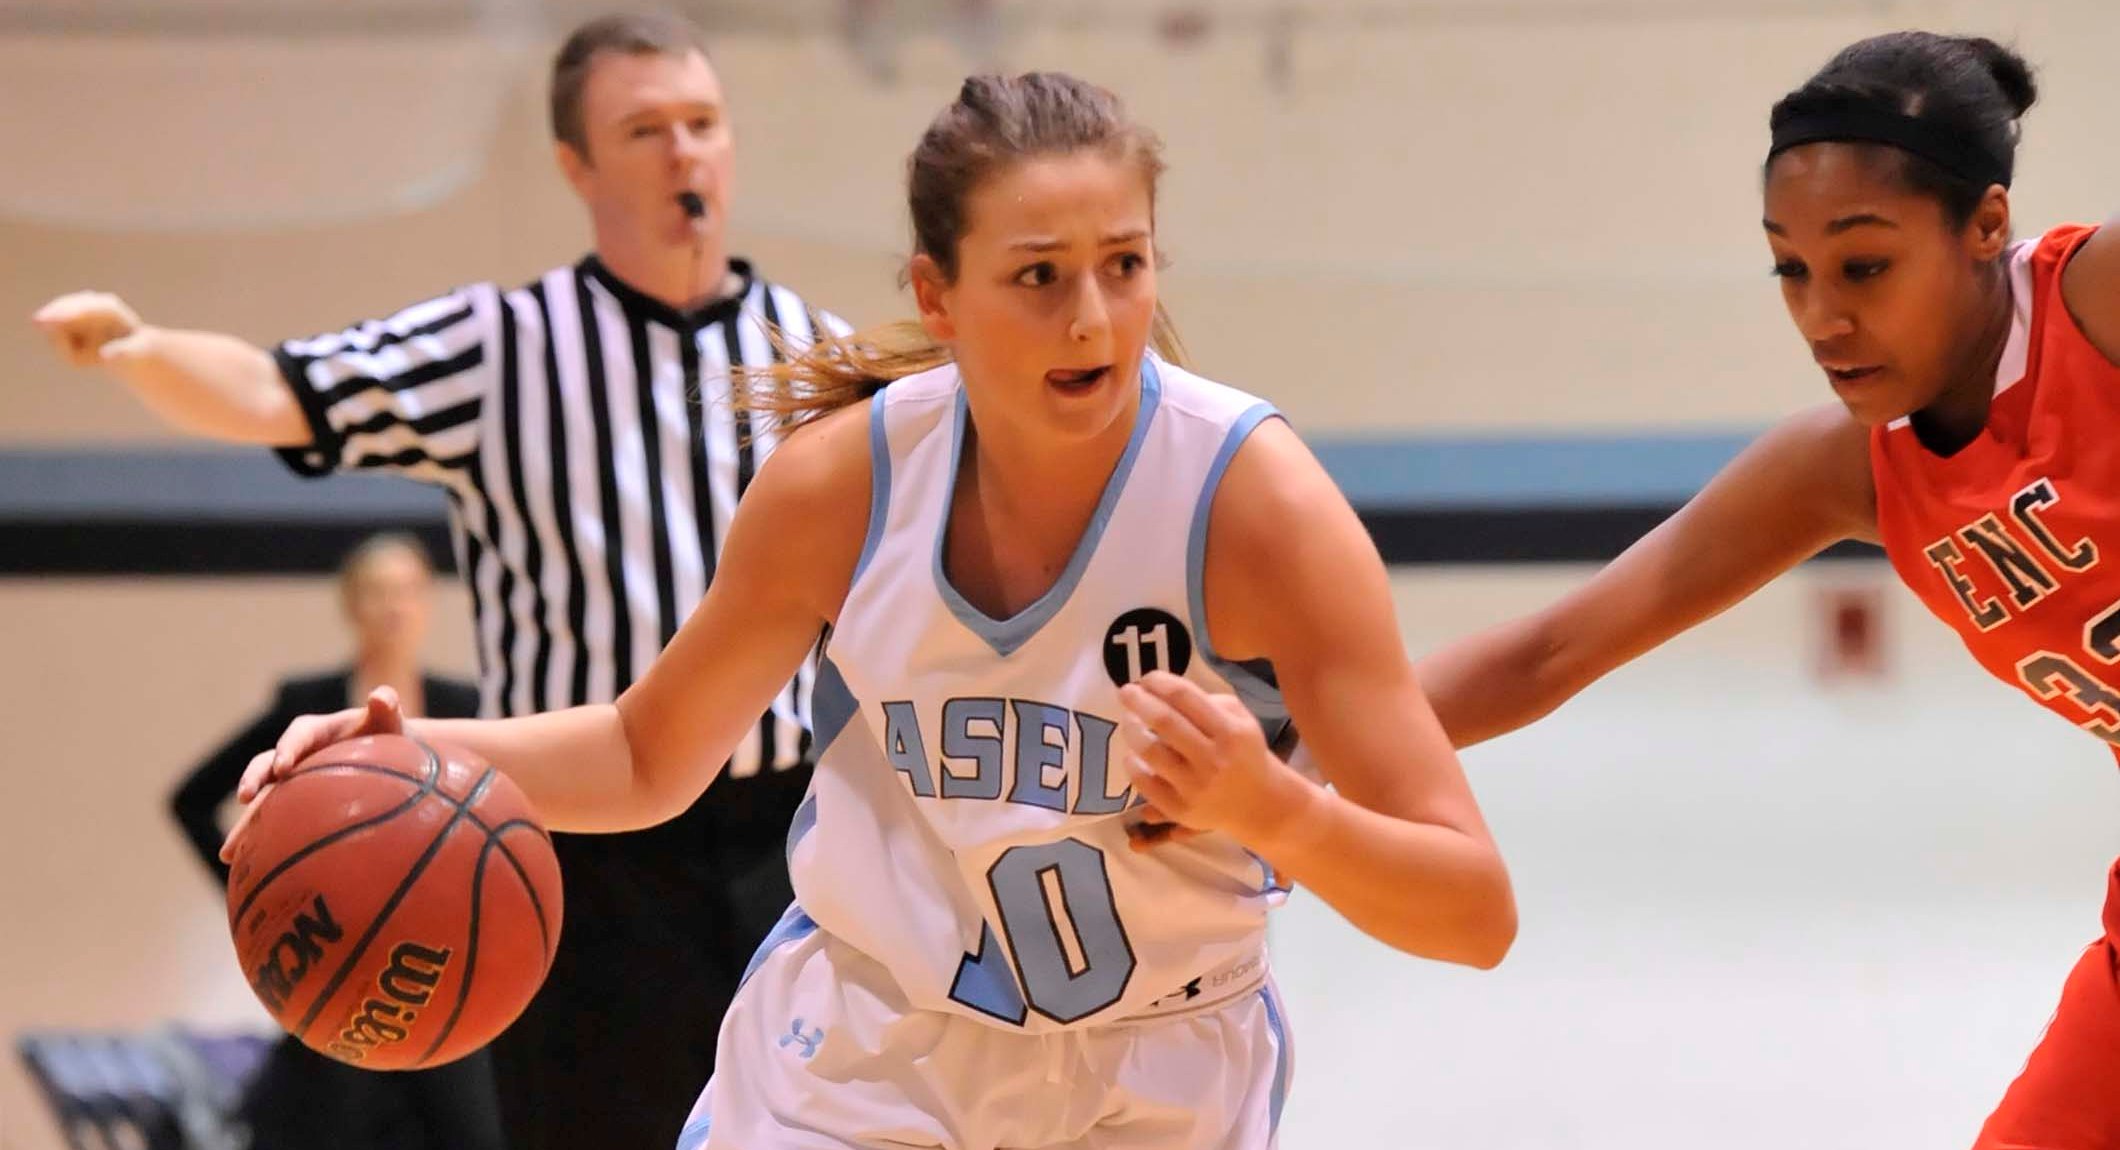 Women’s Basketball Tops Wentworth in 58-55 Victory